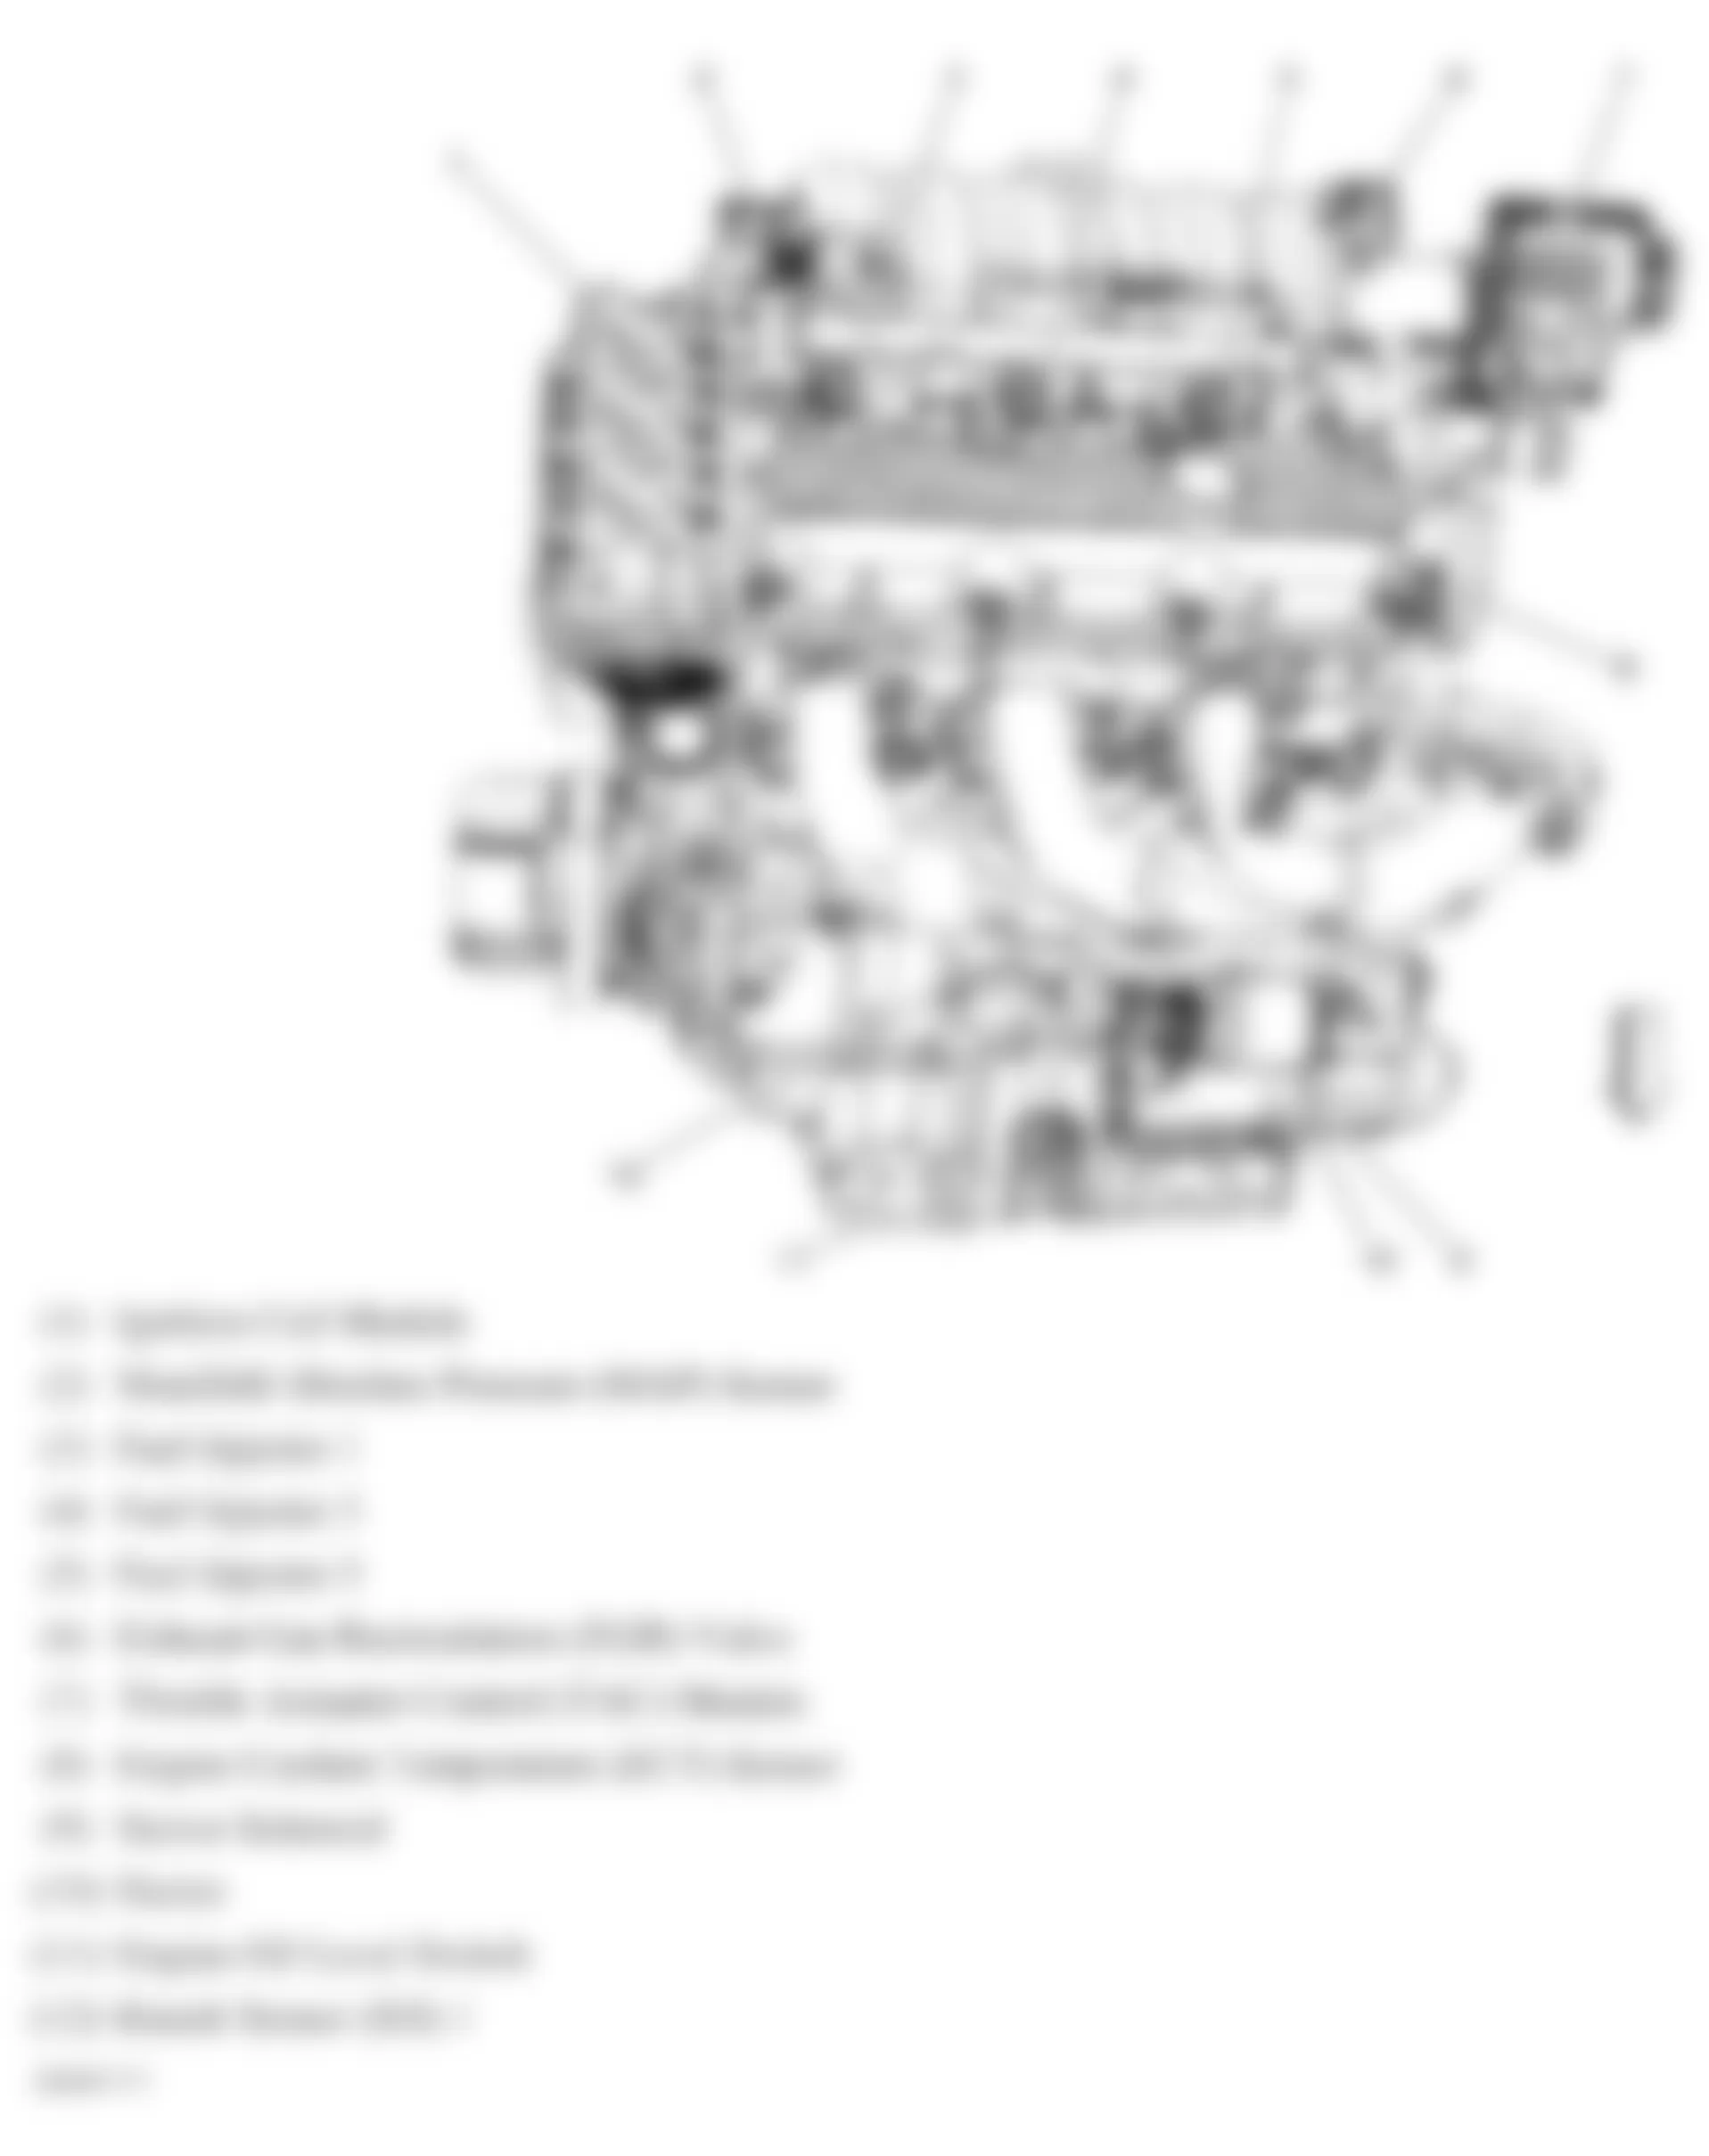 Buick Allure CXL 2008 - Component Locations -  Left Side Of Engine (3.8L)